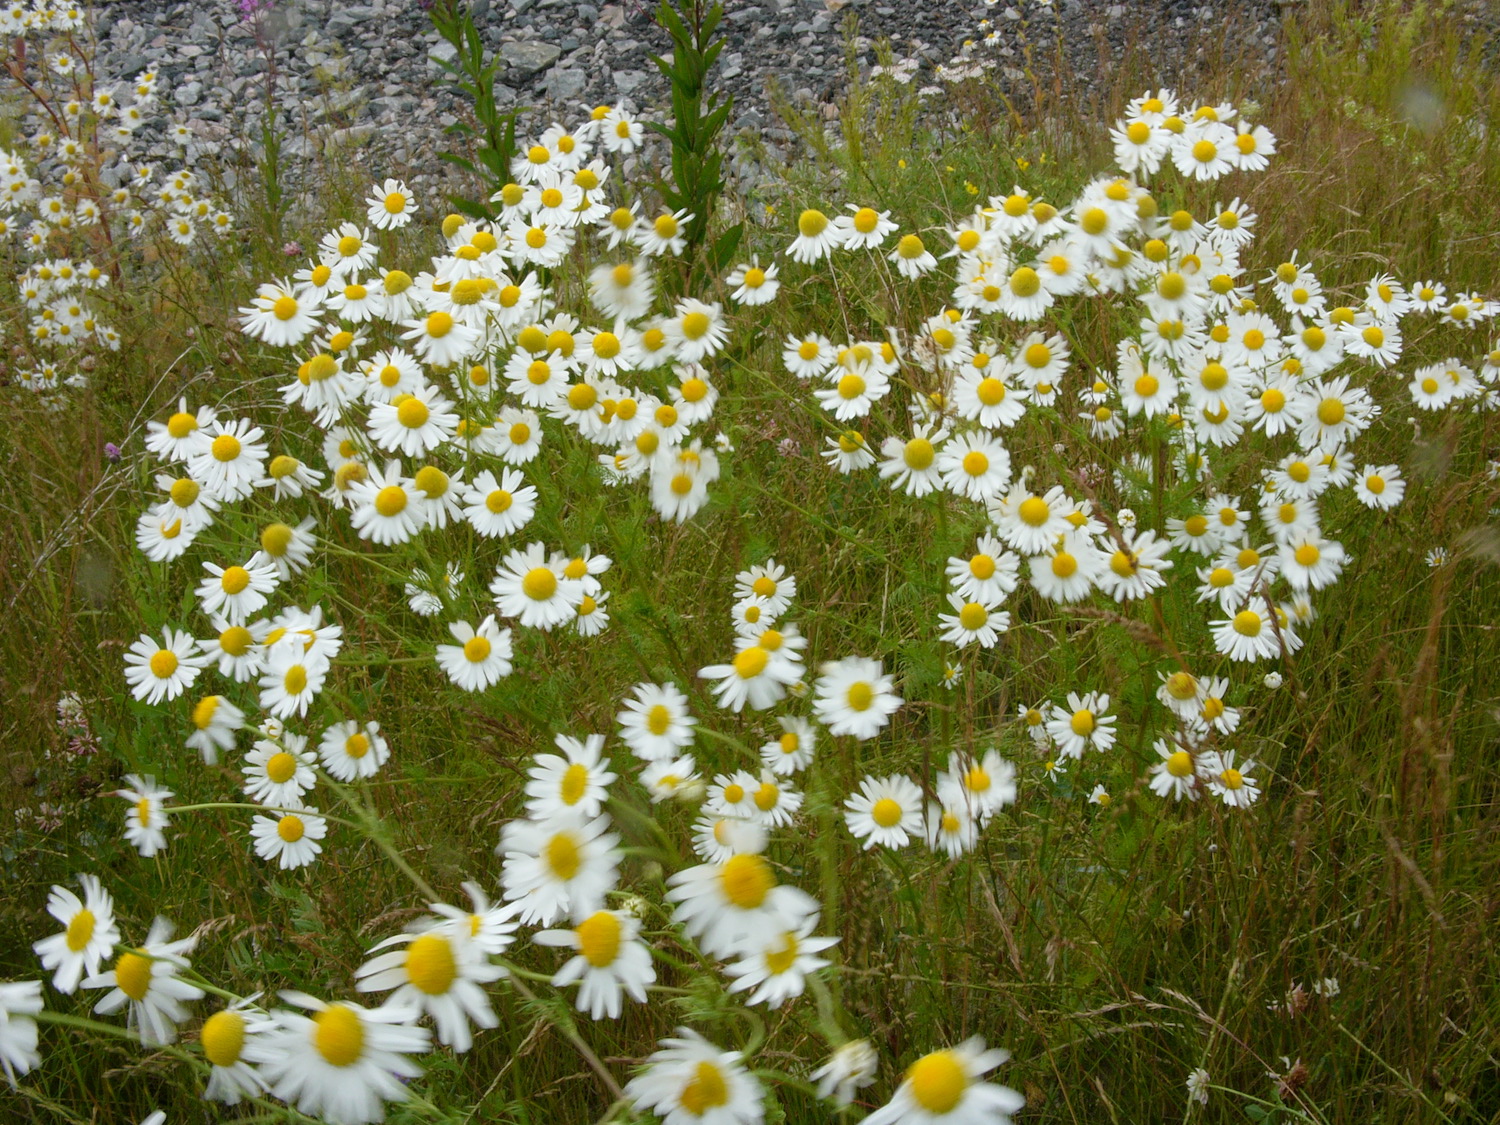 Camomile grows beside the streets